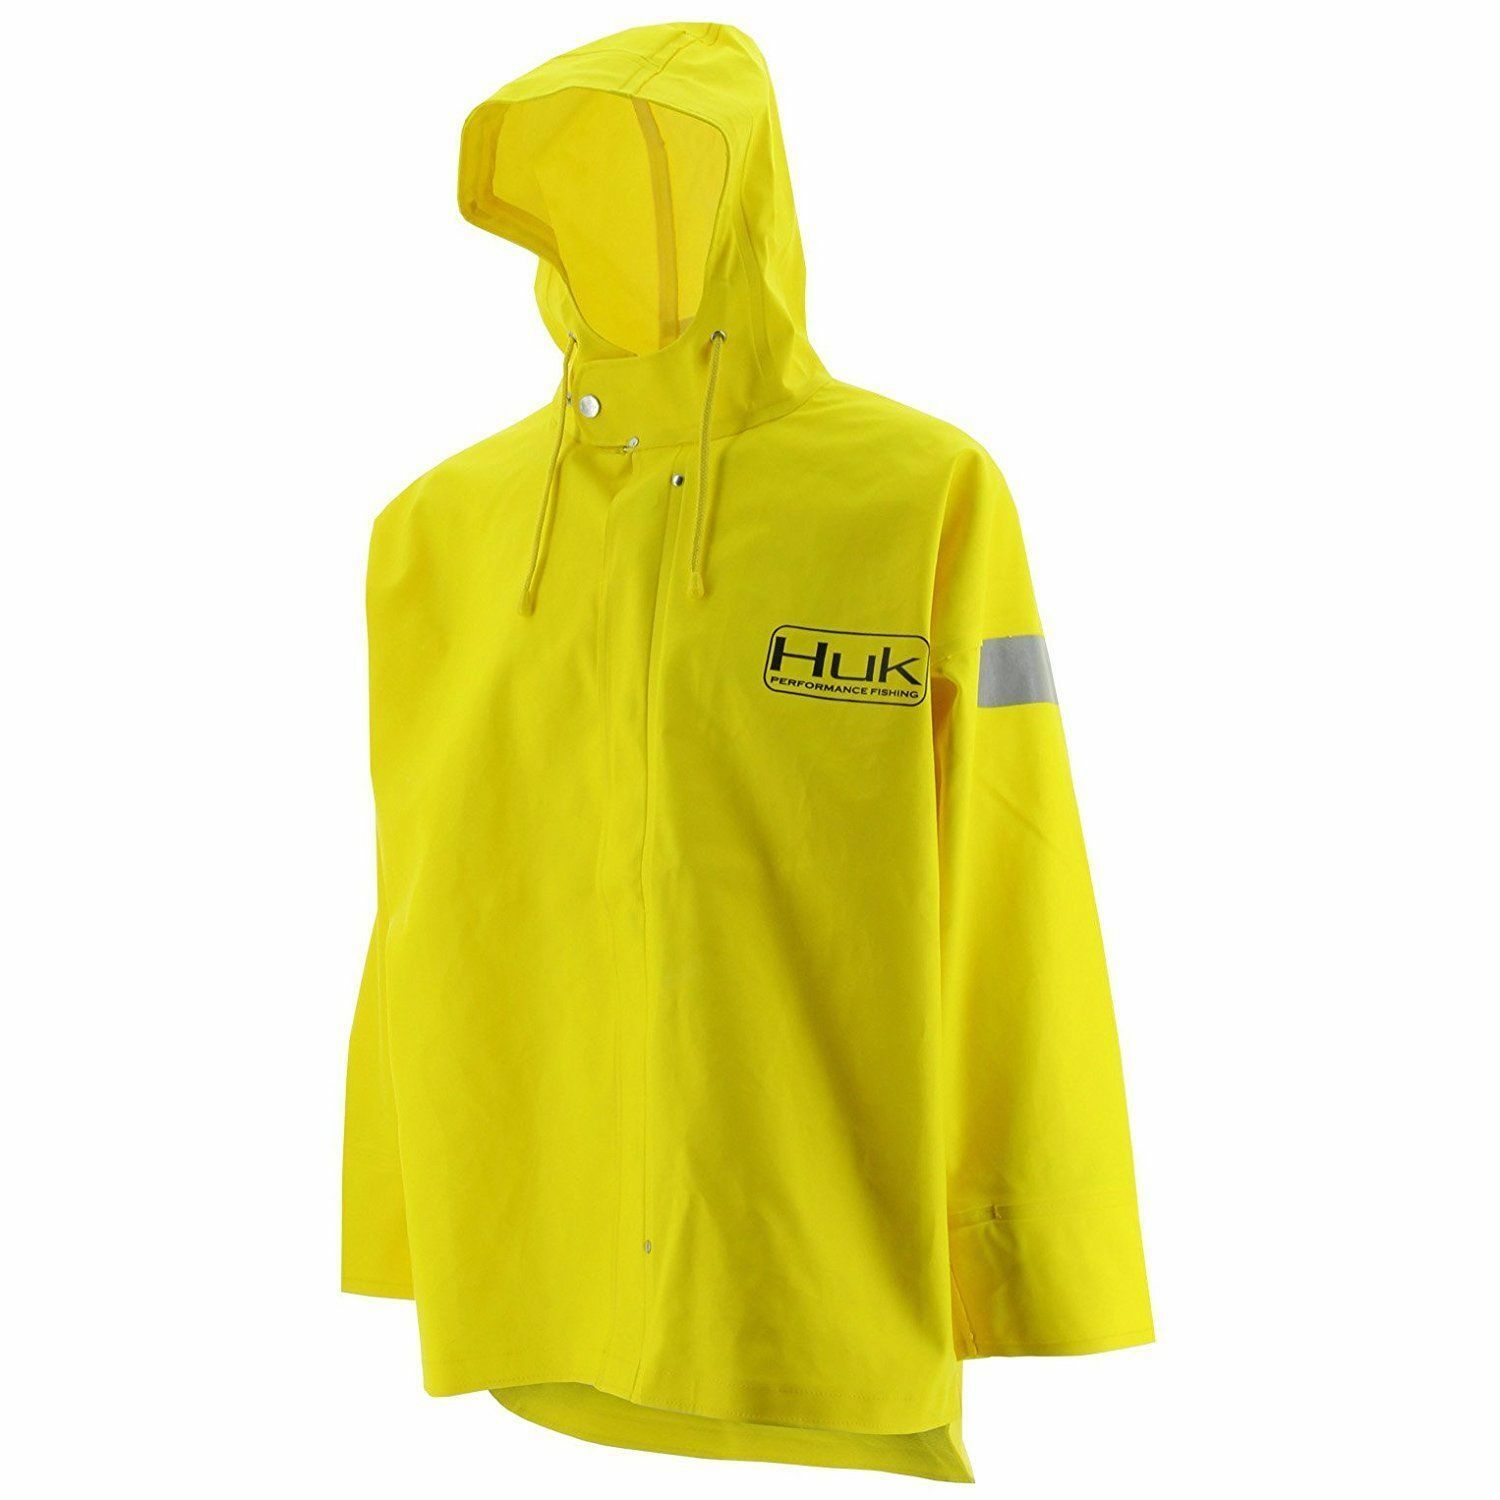 2440 Huk Commercial Grade Pvc Waterproof Foul Weather Jacket Yellow Size Xl